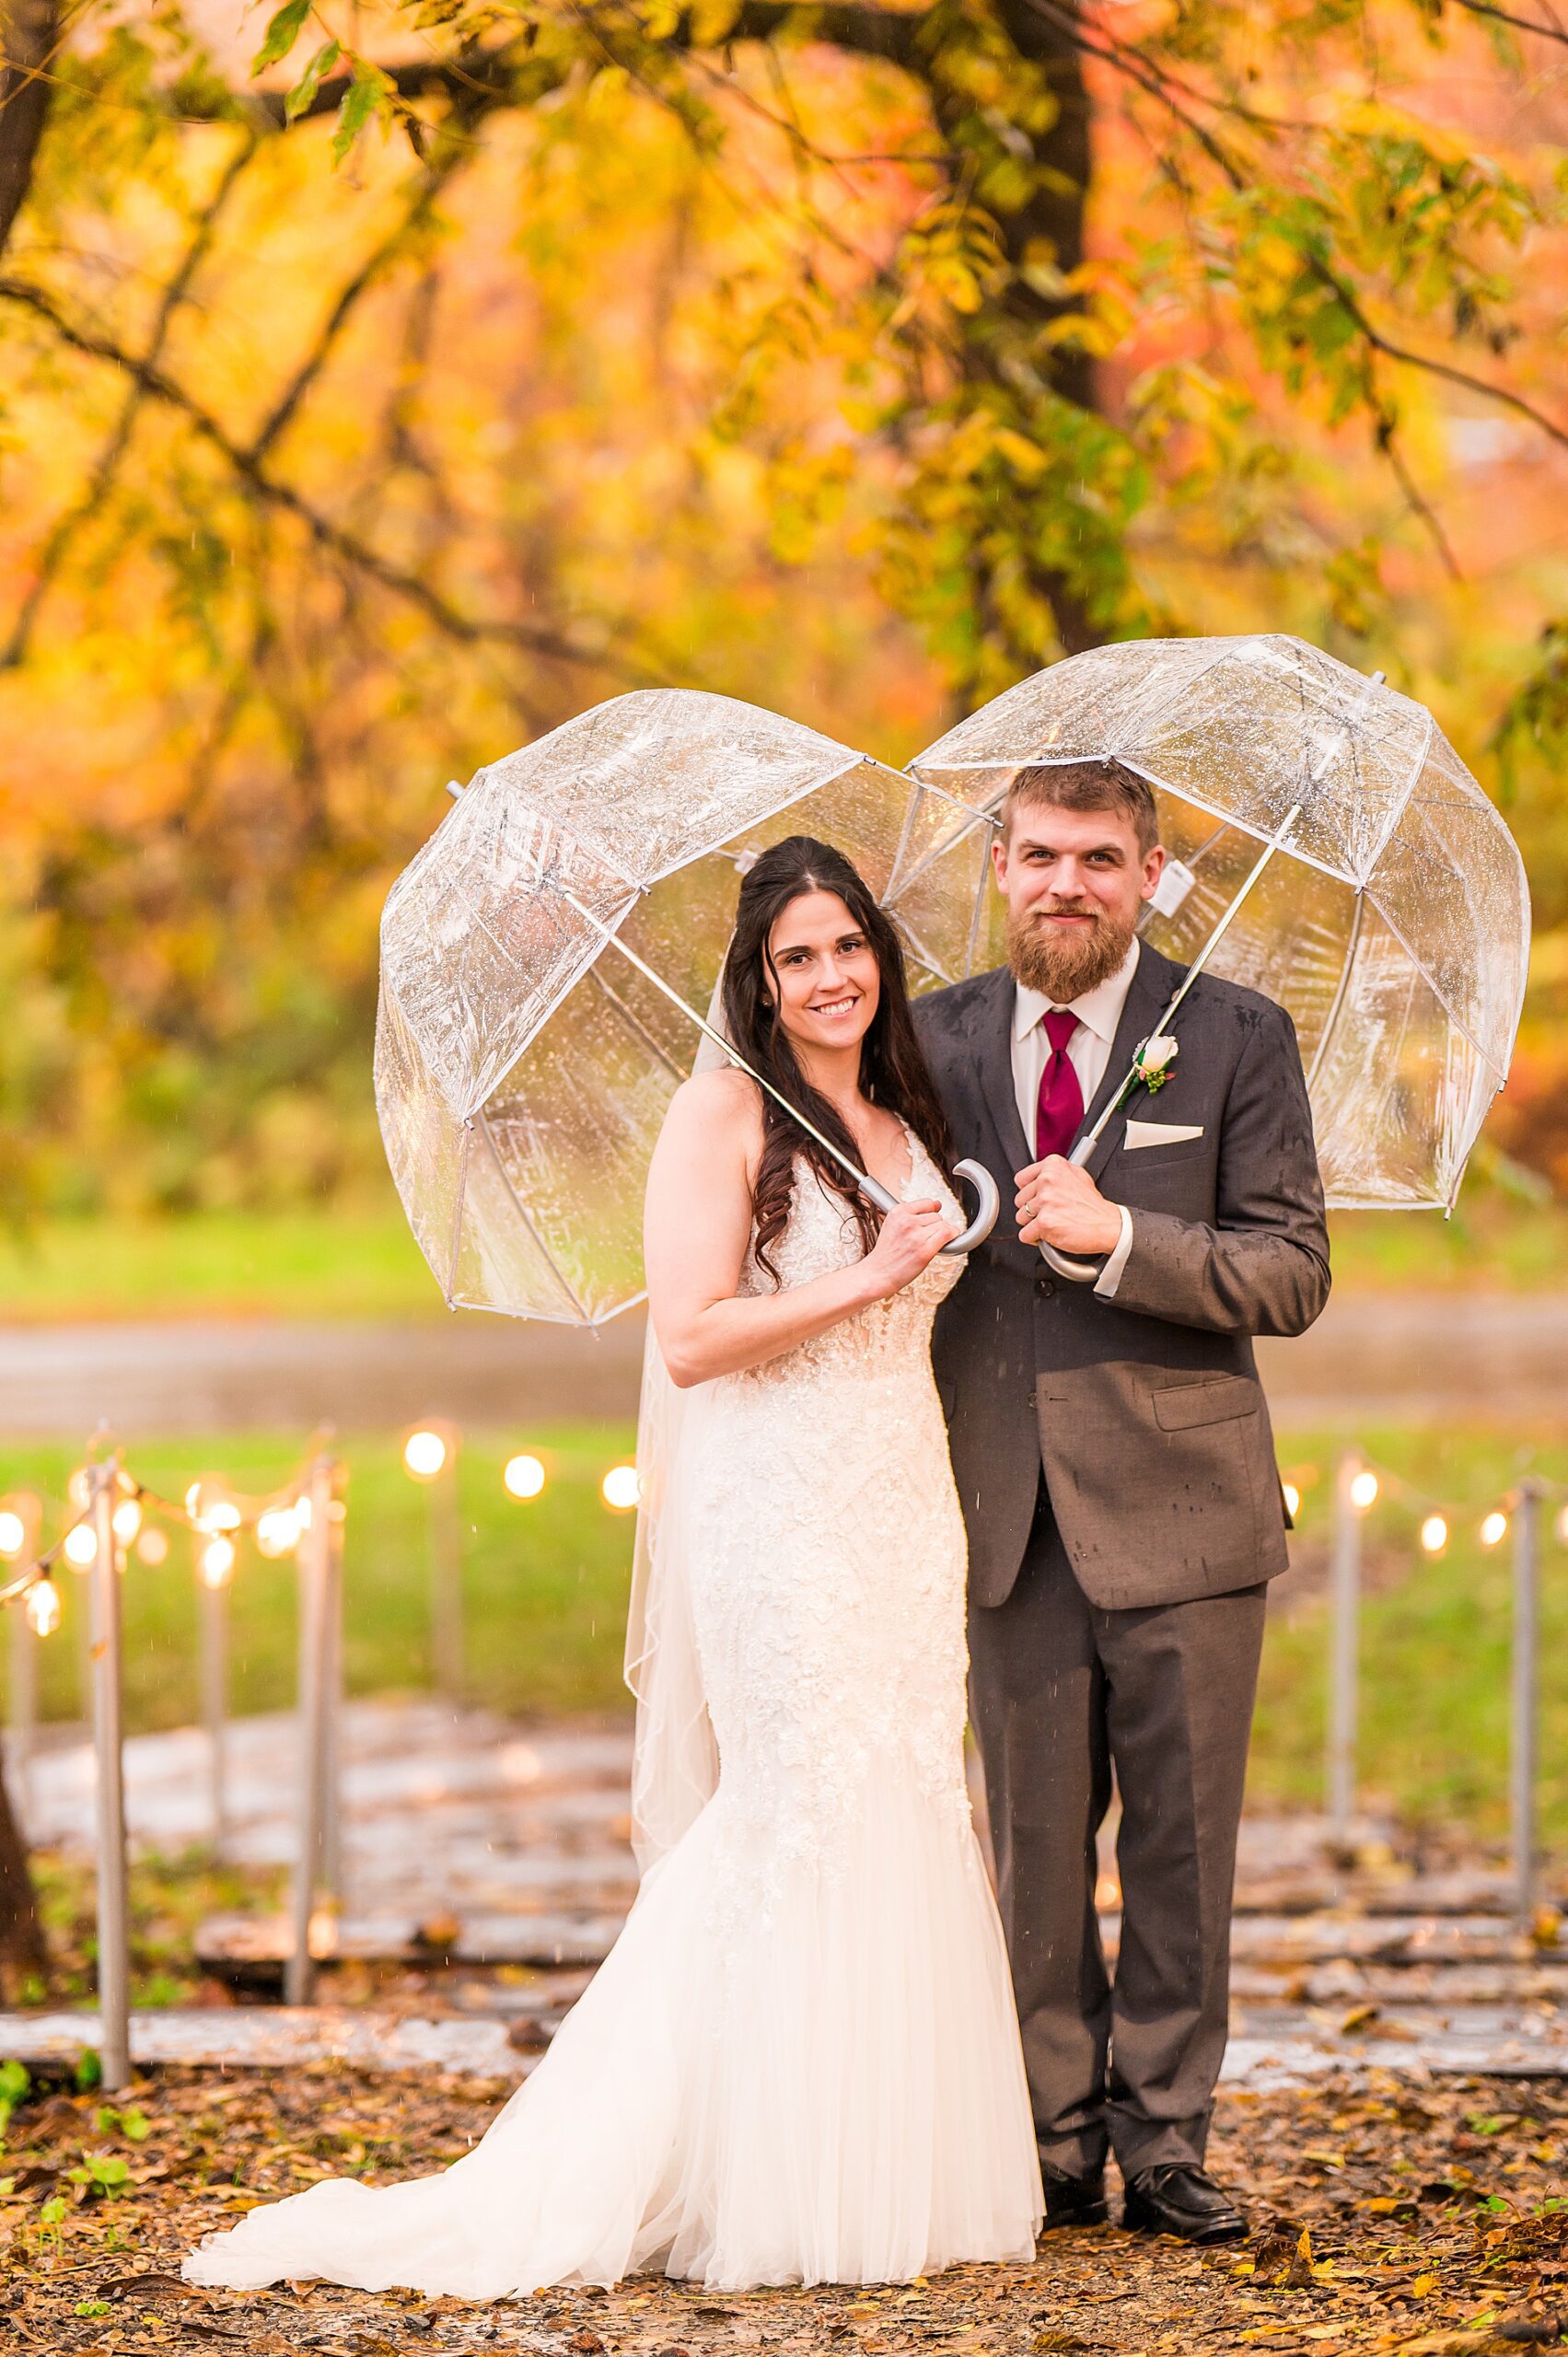 Intimate Fall Wedding photos at Josiah's Meetinghouse in epping, NH